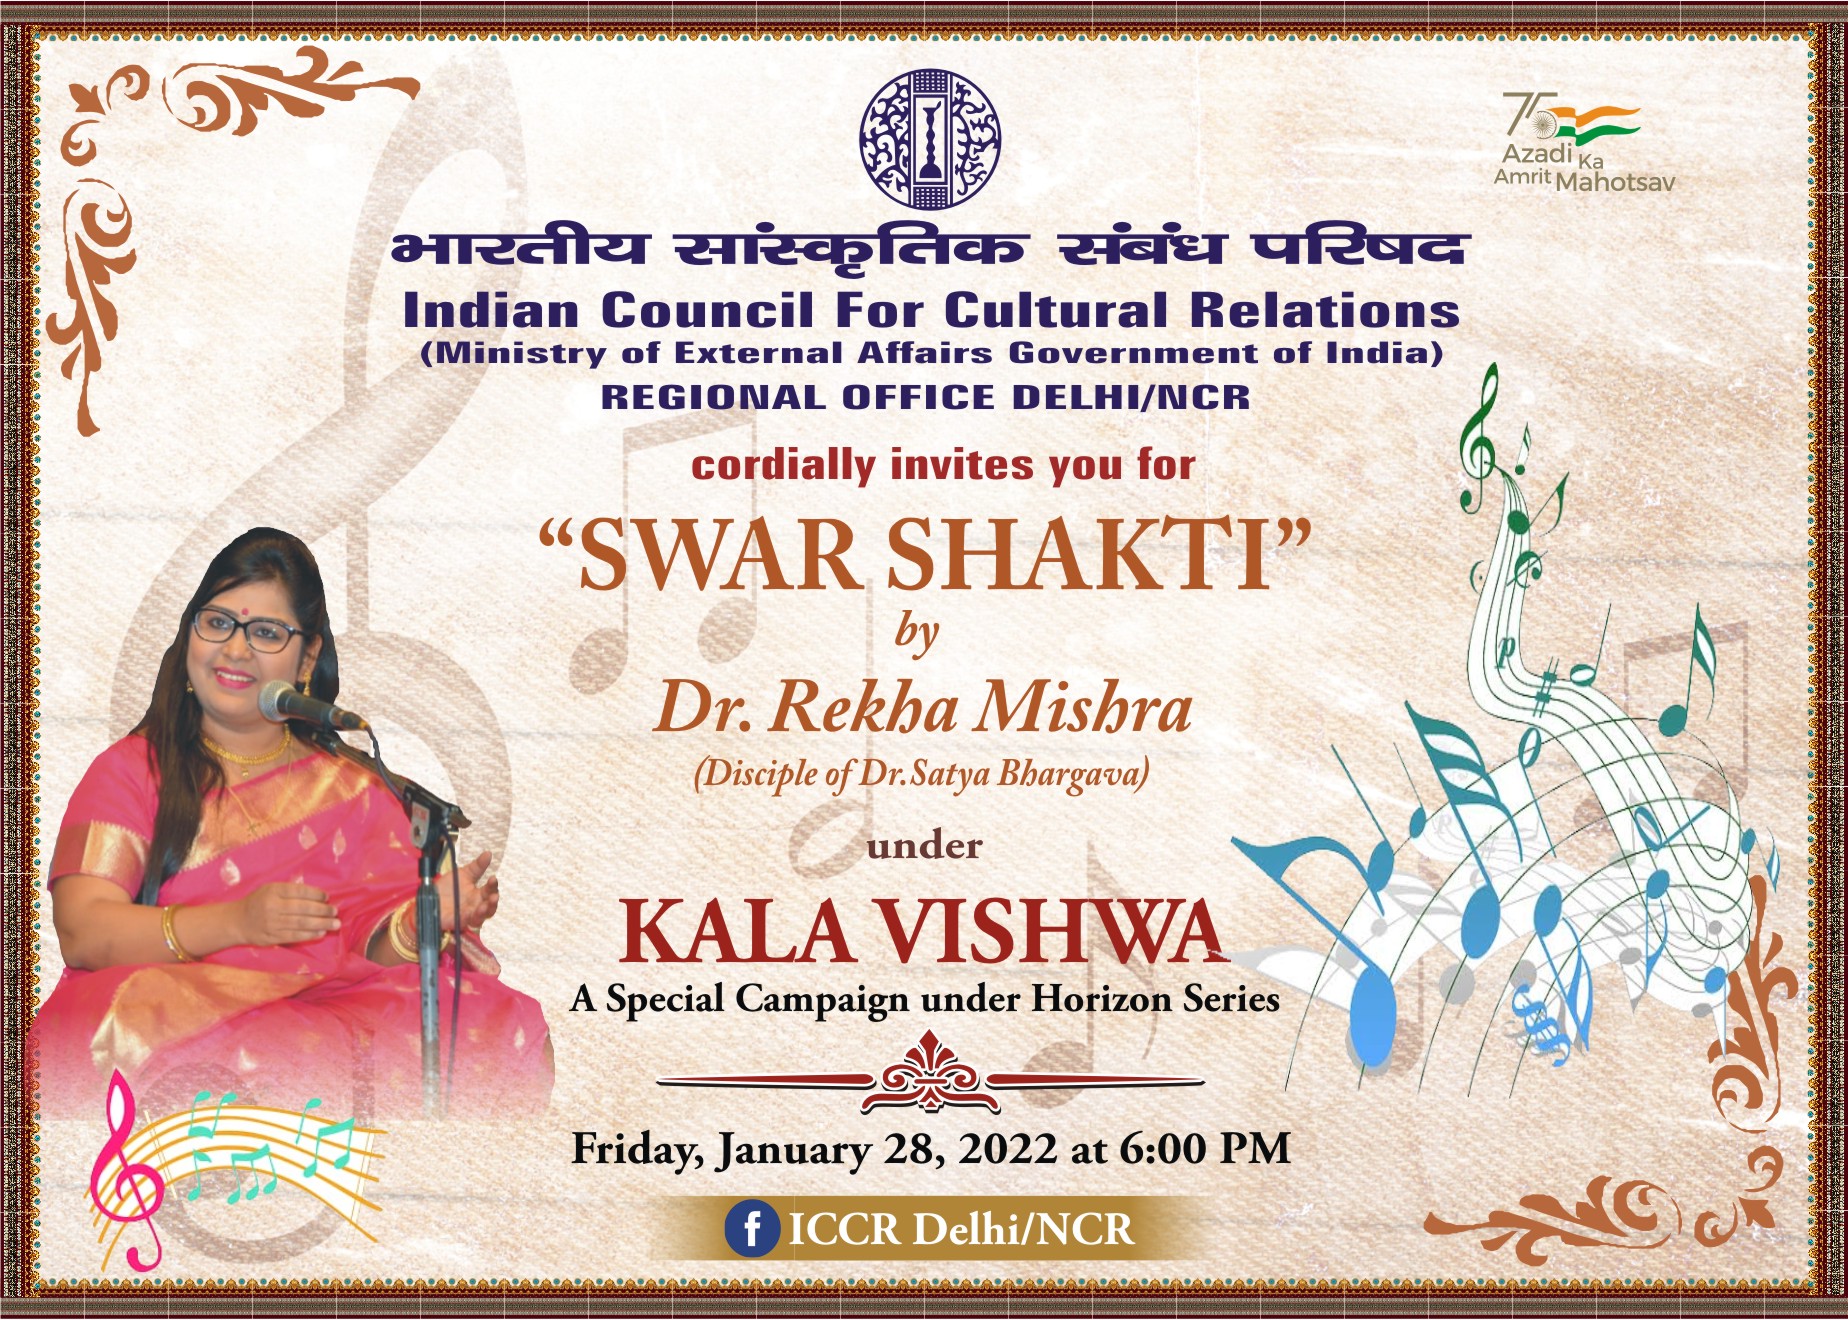 ICCR (Delhi/NCR) is presenting 'SWAR SHAKTI' a  Hindustani Classical Vocal by Dr. Rekha Mishra as its Episode 8 of KALA VISHWA, a special campaign under Horizon Series on  Thursday, January 28, 2022 at 6 PM.